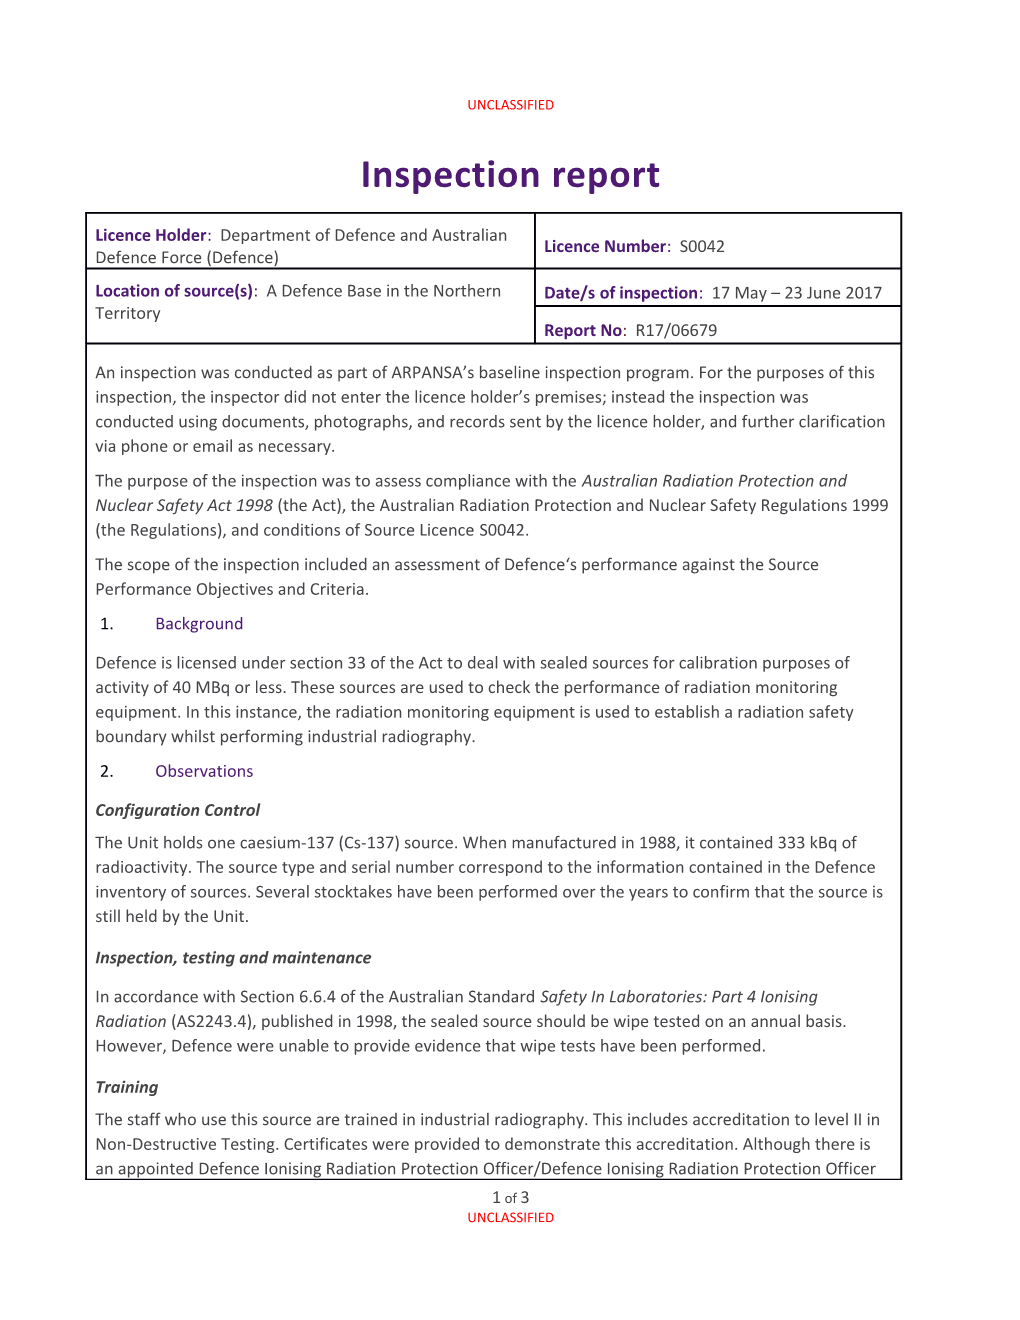 Inspection Report: a Defence Base in the Northern Territory